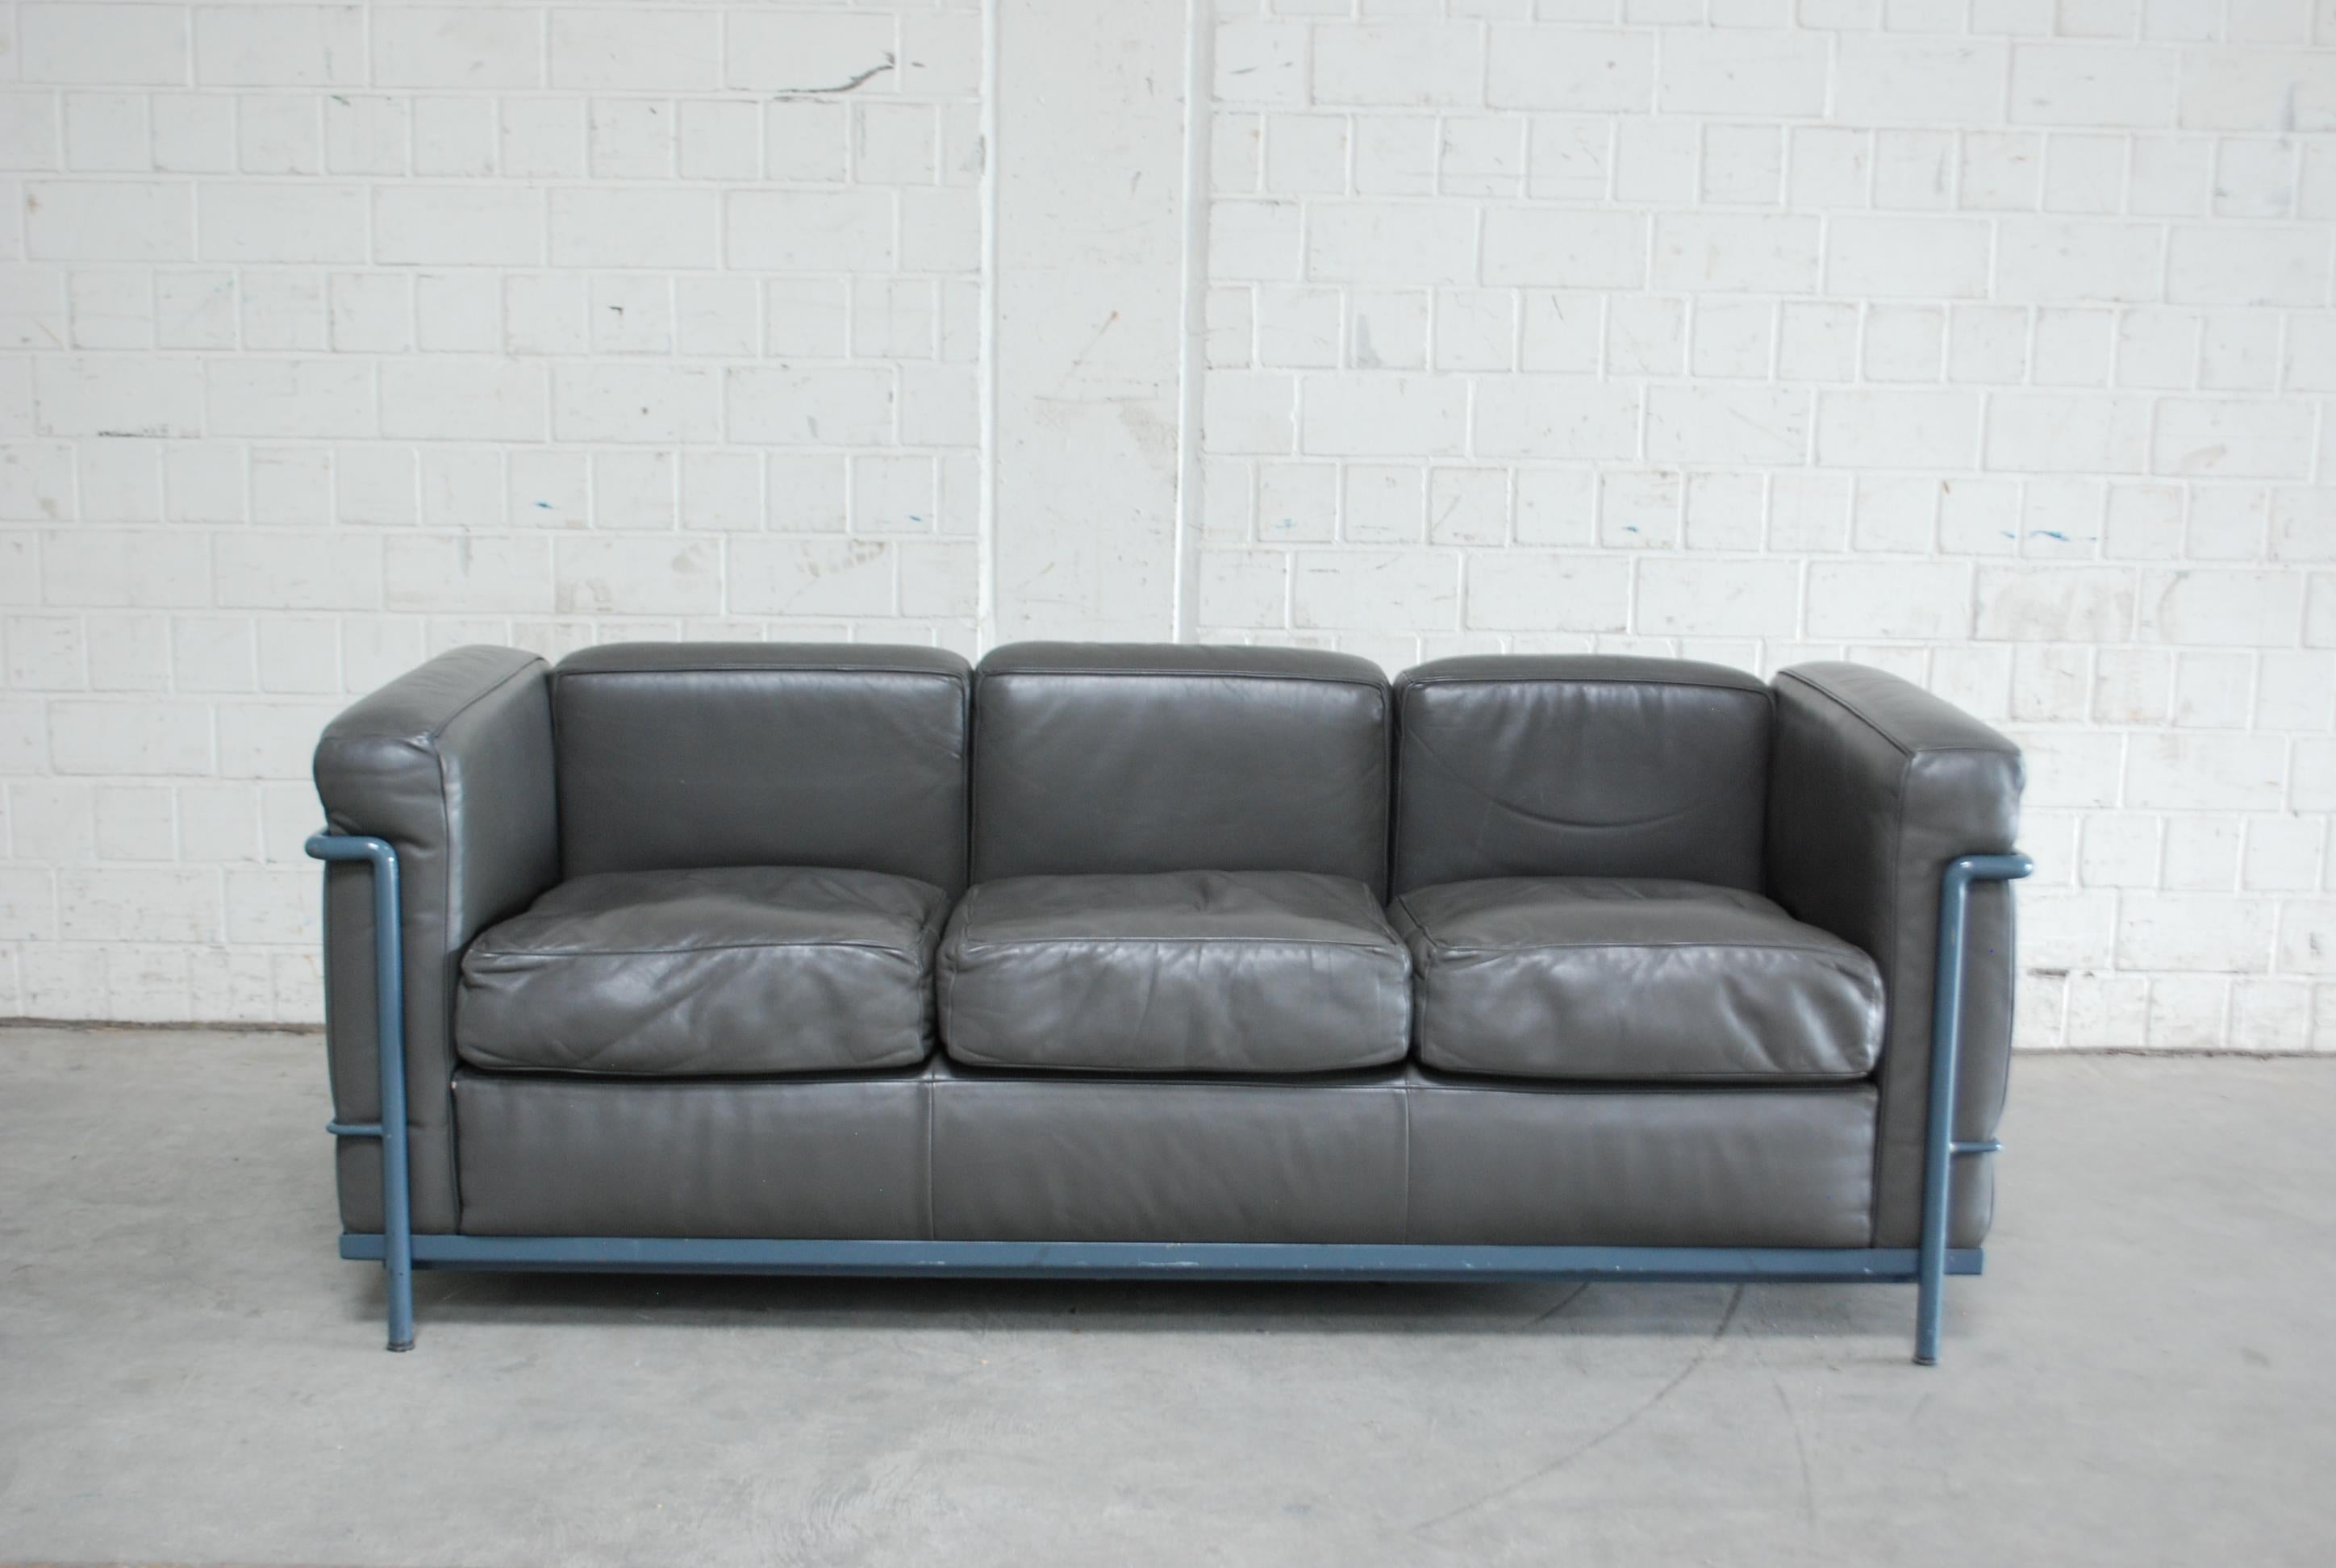 This LC2 three-seat sofa in grey leather was designed by Le Corbusier and produced by Cassina.
It features a blue/ grey colored tubular steel frame. Some marks on the tubular frame.